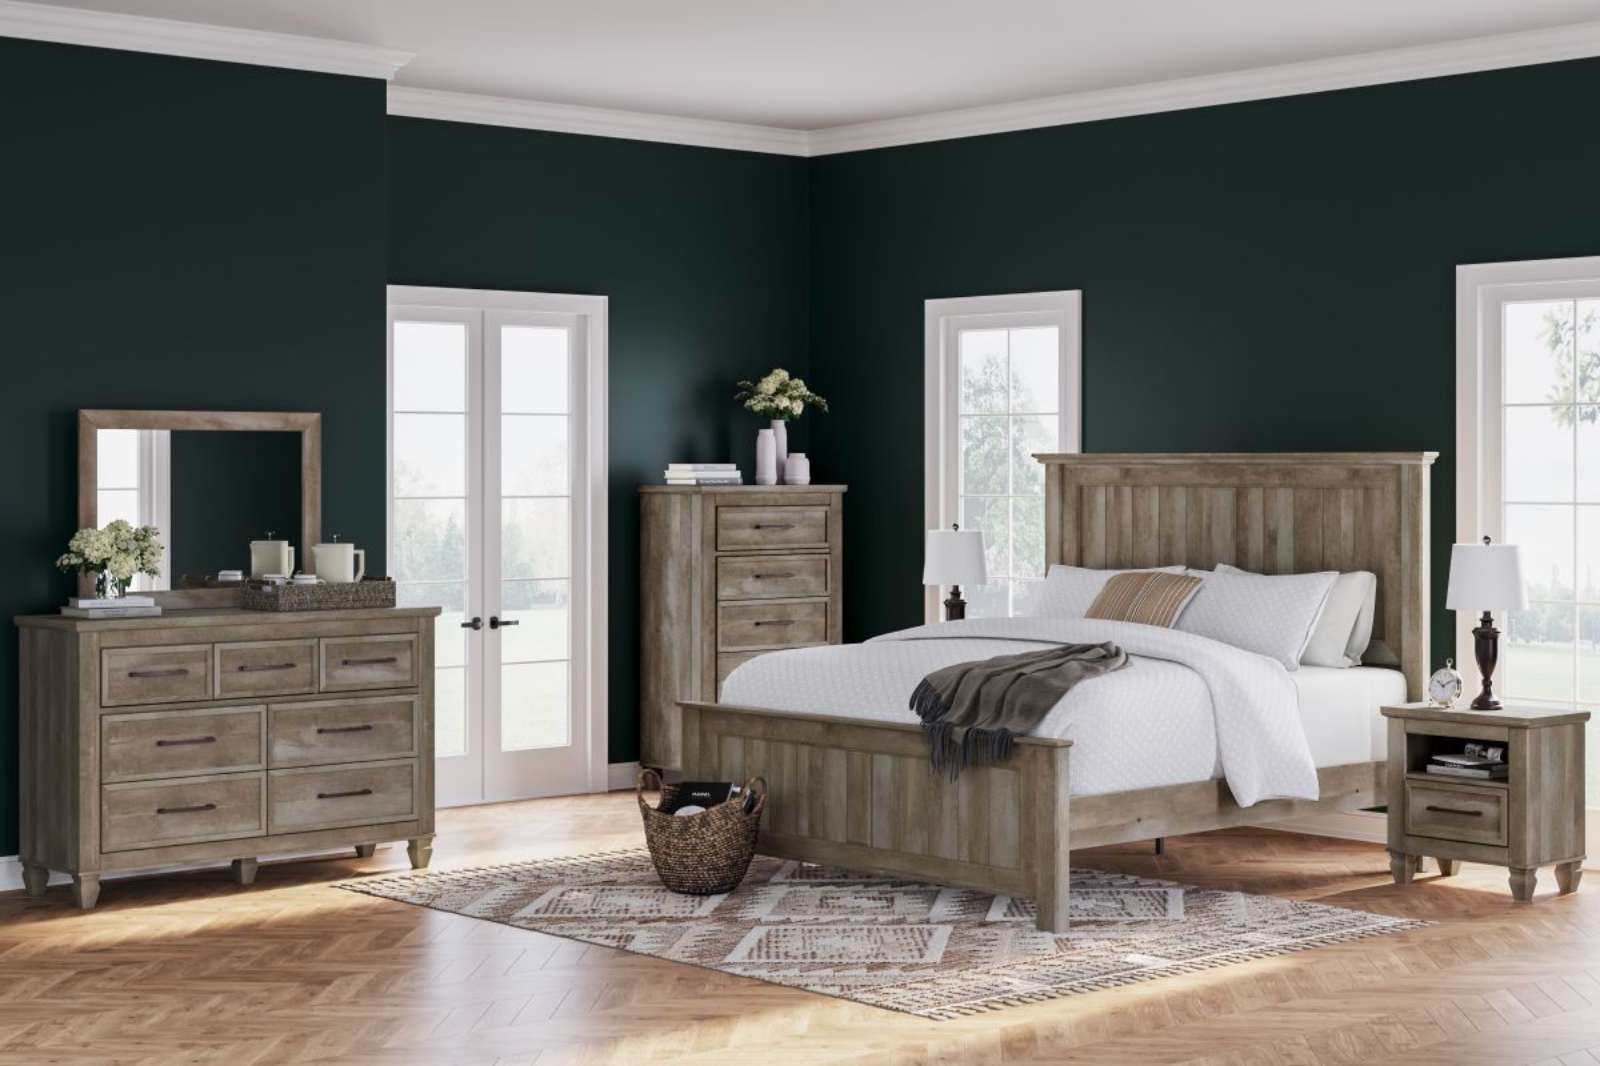 Picture of Yarbeck 5 Piece King Bedroom Group